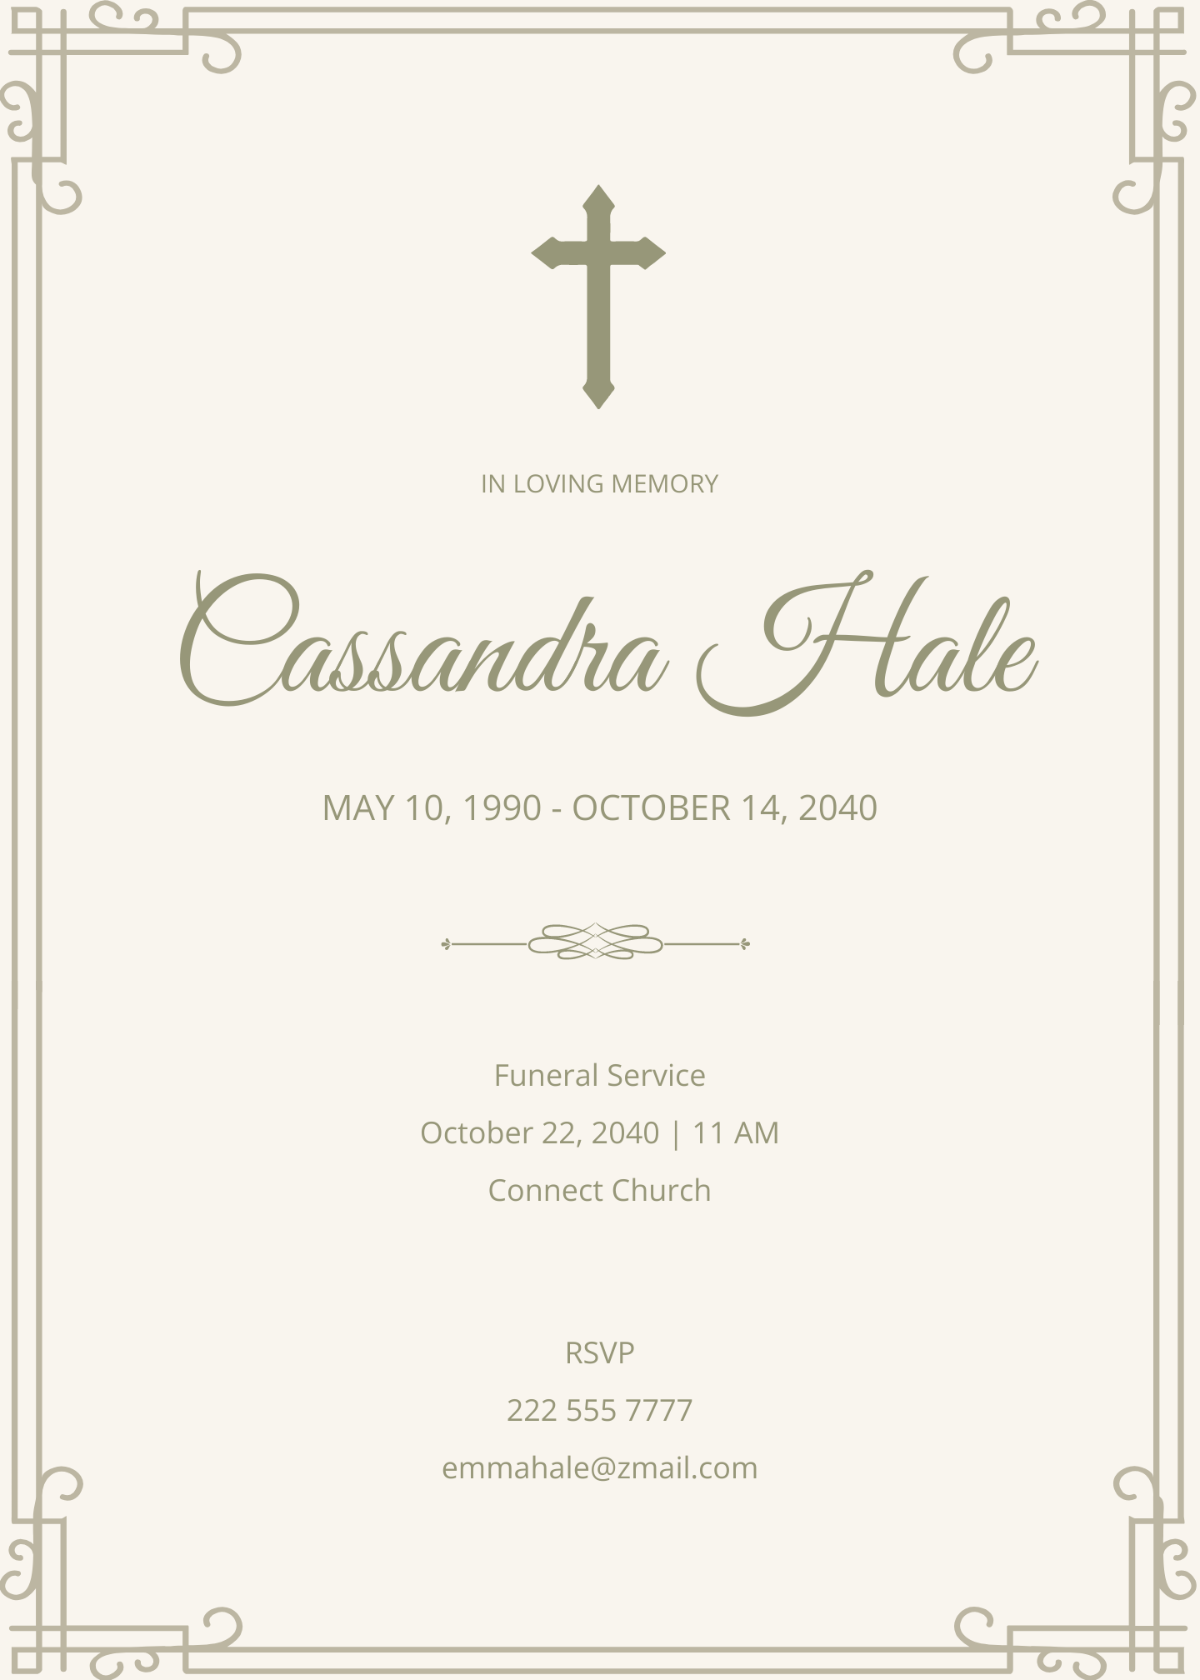 Traditional Catholic Funeral Card Template